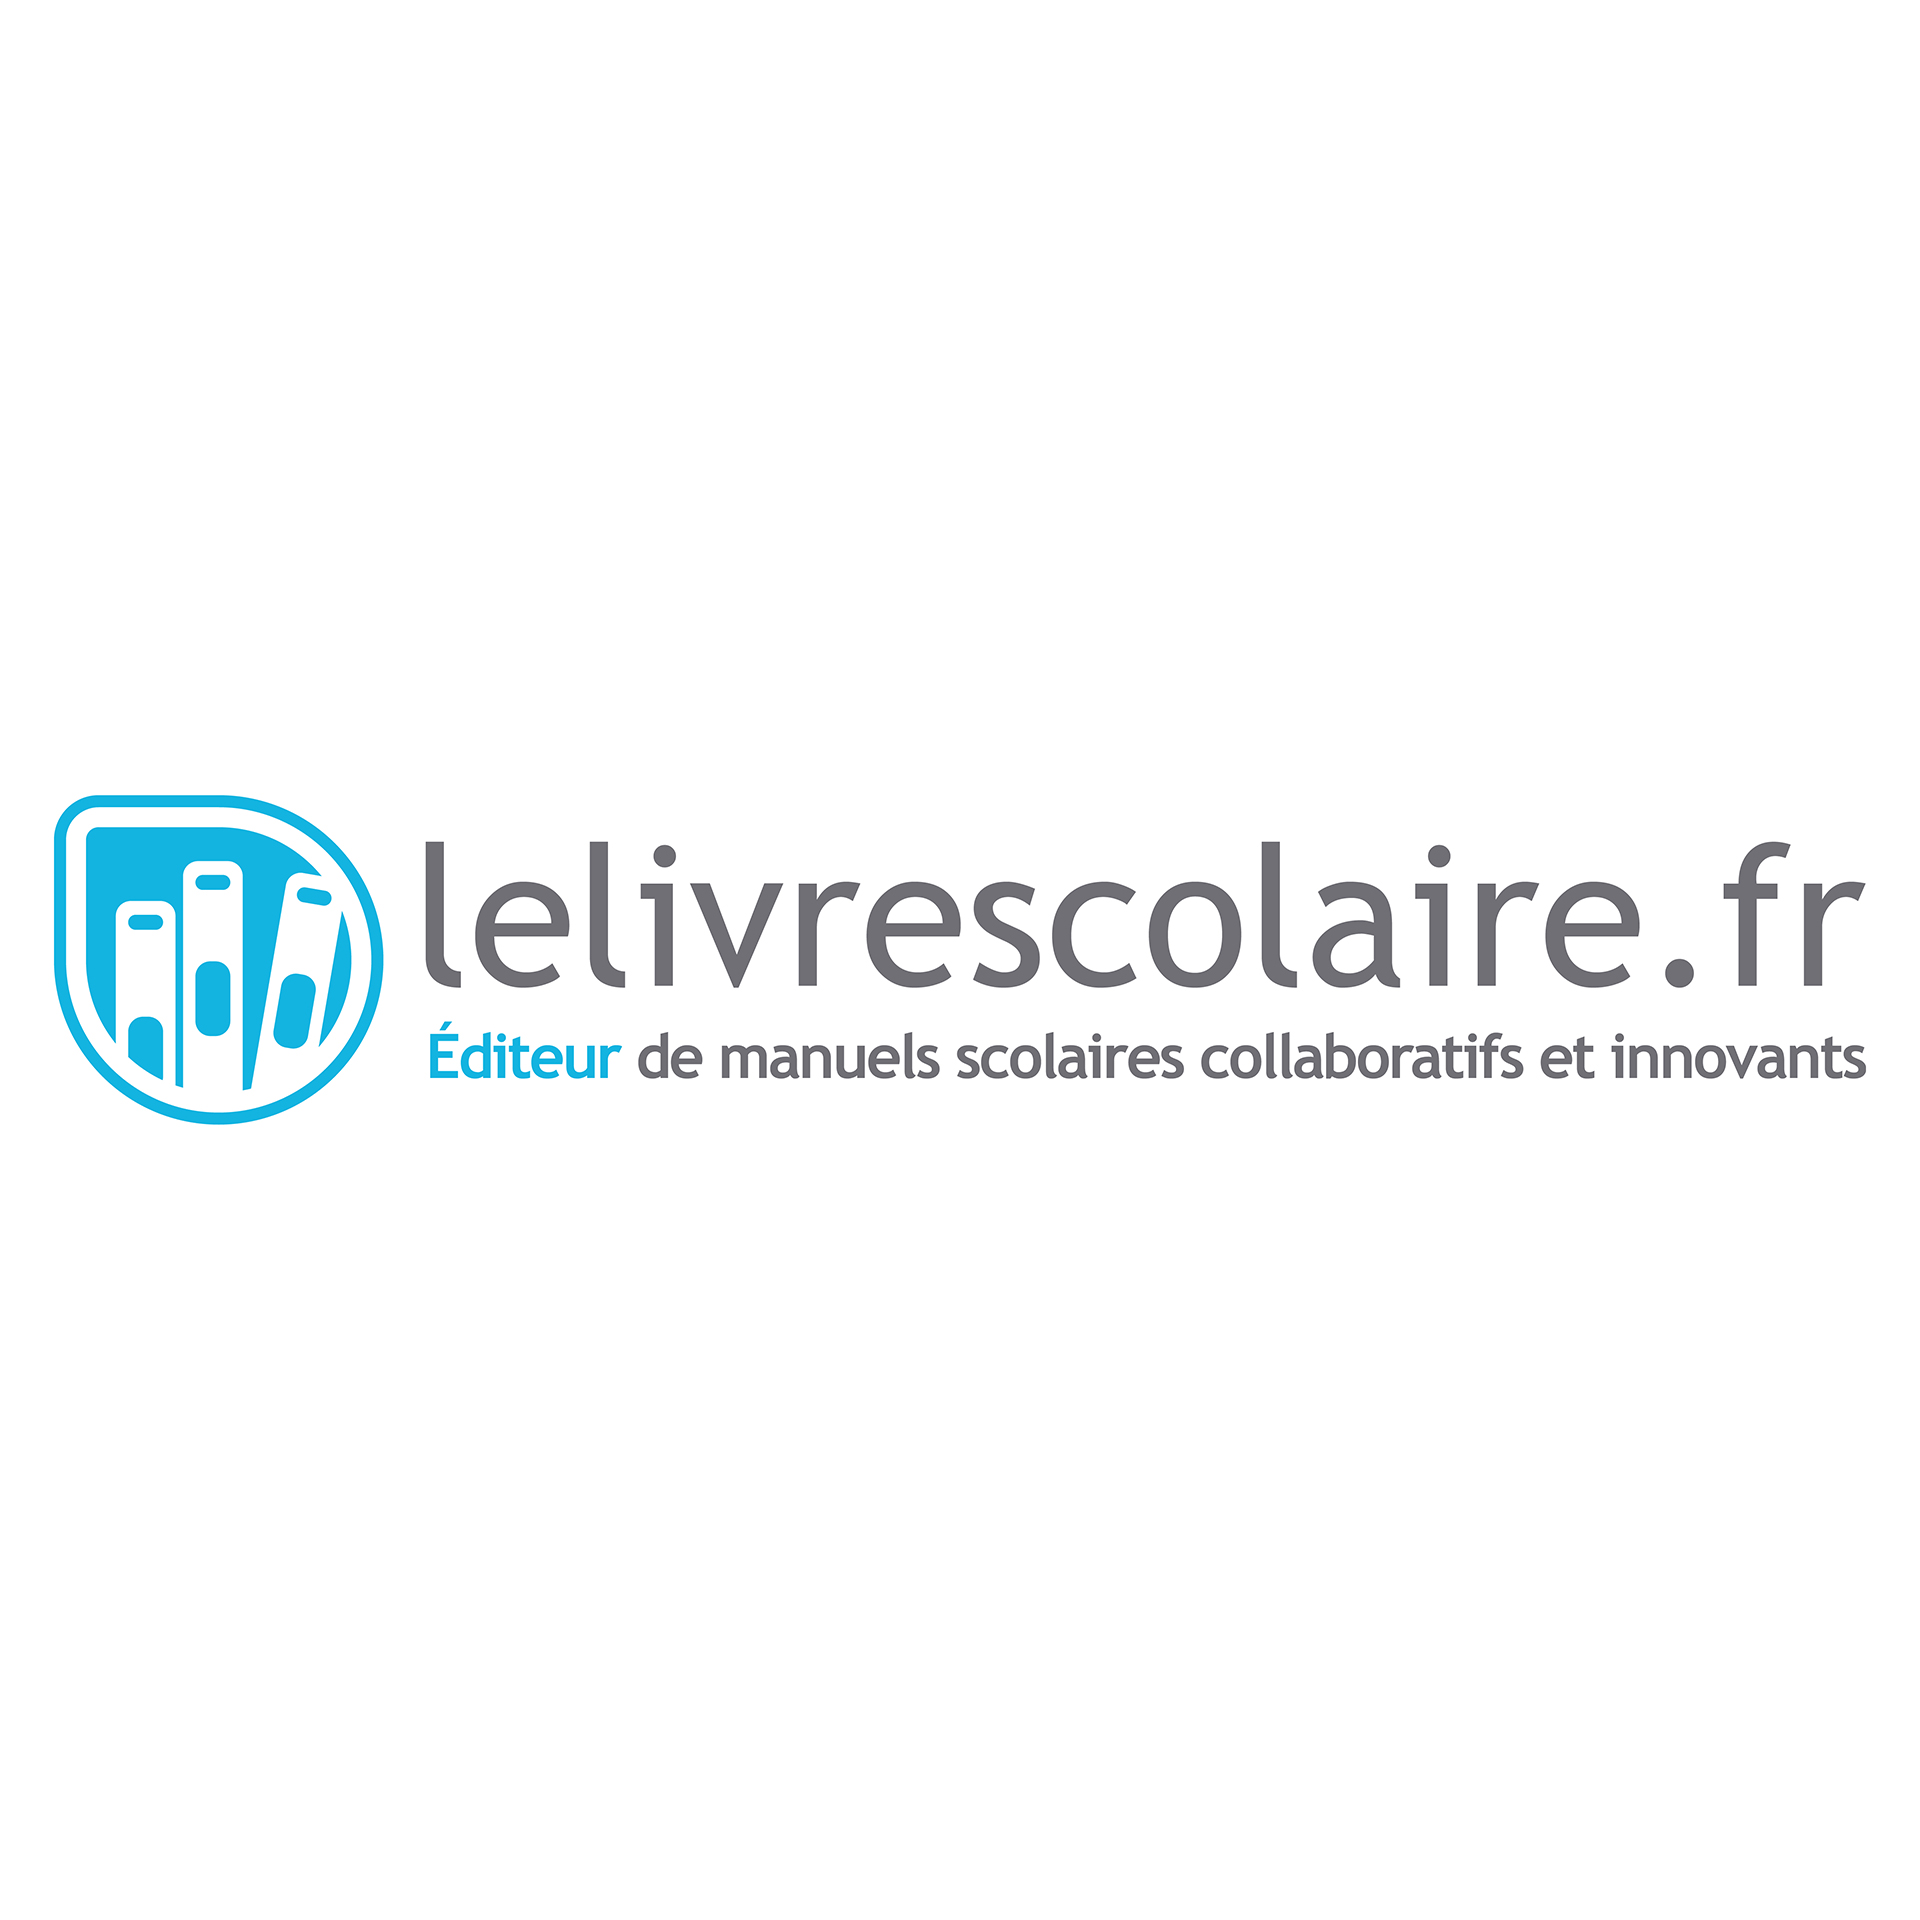 See the In Lyon, Lelivrescolaire.fr takes off in digital publishing success story